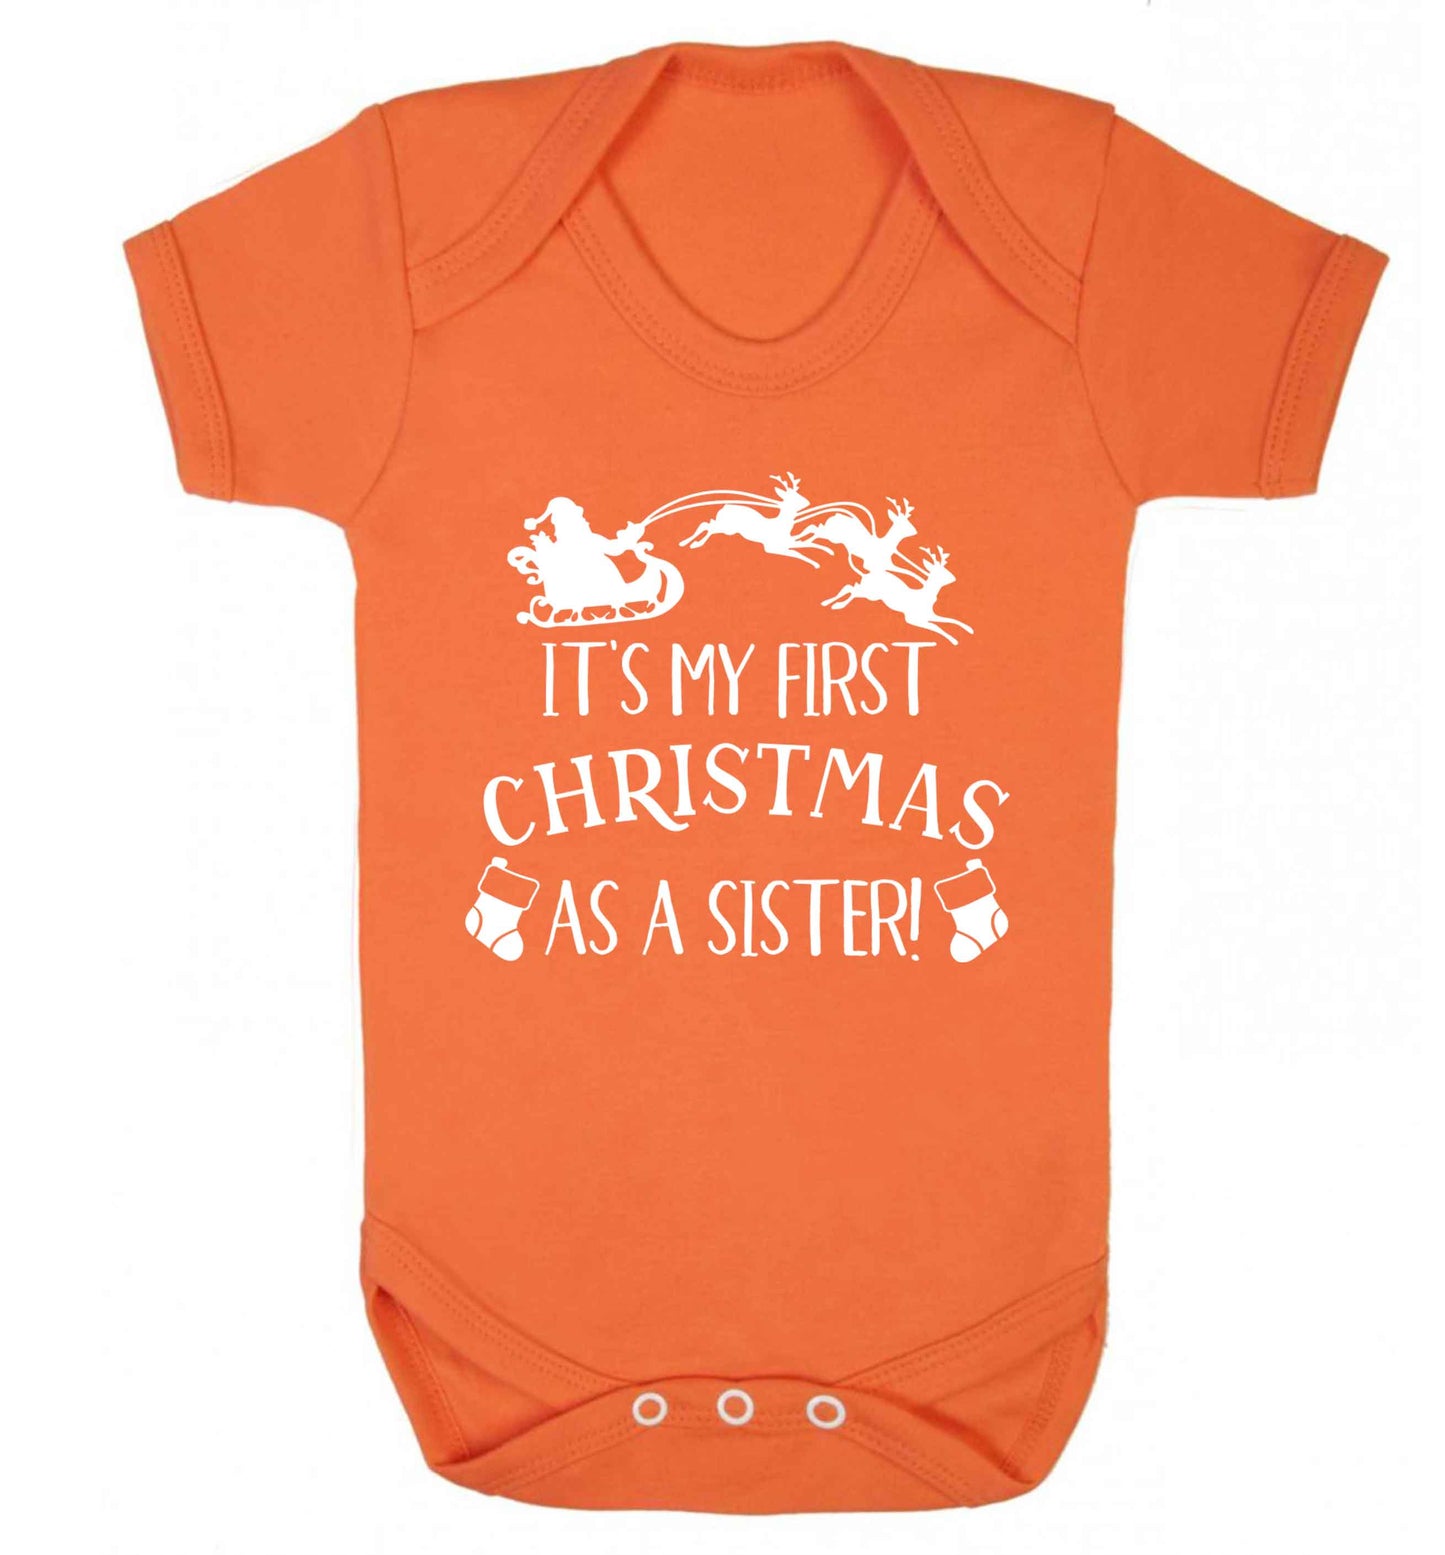 It's my first Christmas as a sister! Baby Vest orange 18-24 months